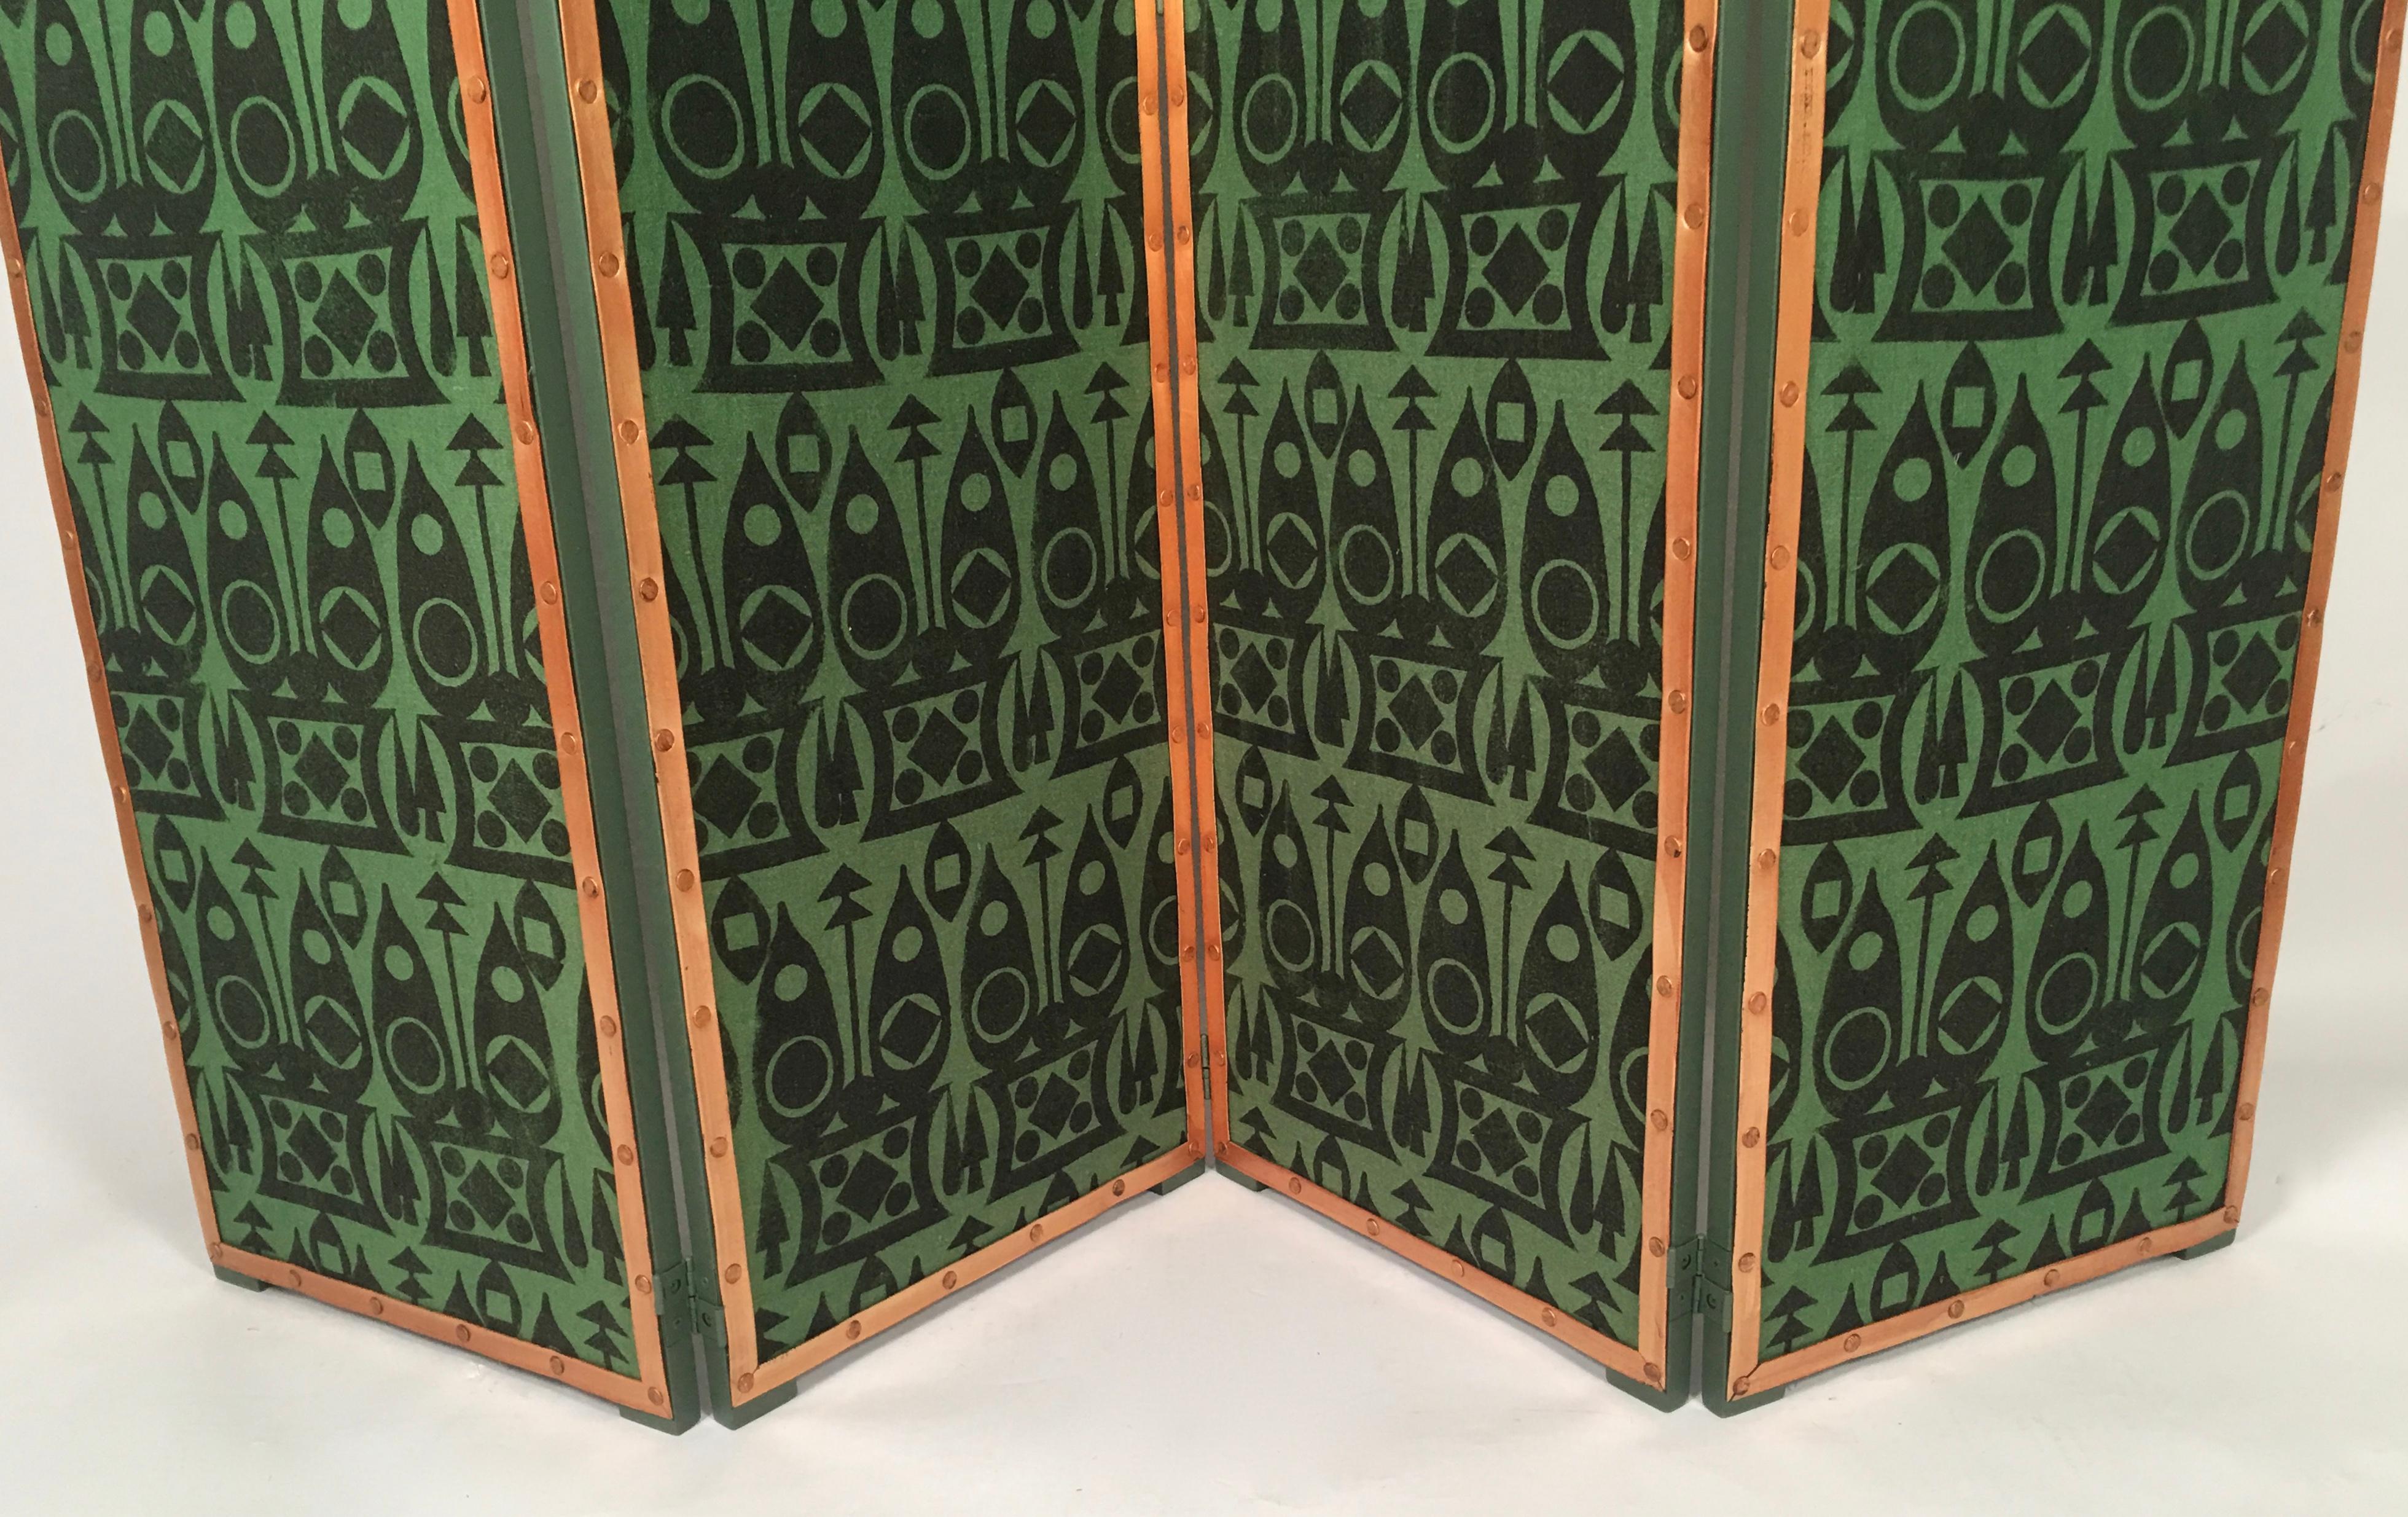 Hand-Crafted Hand Block Printed Black and Green Fabric Four Panel Screen